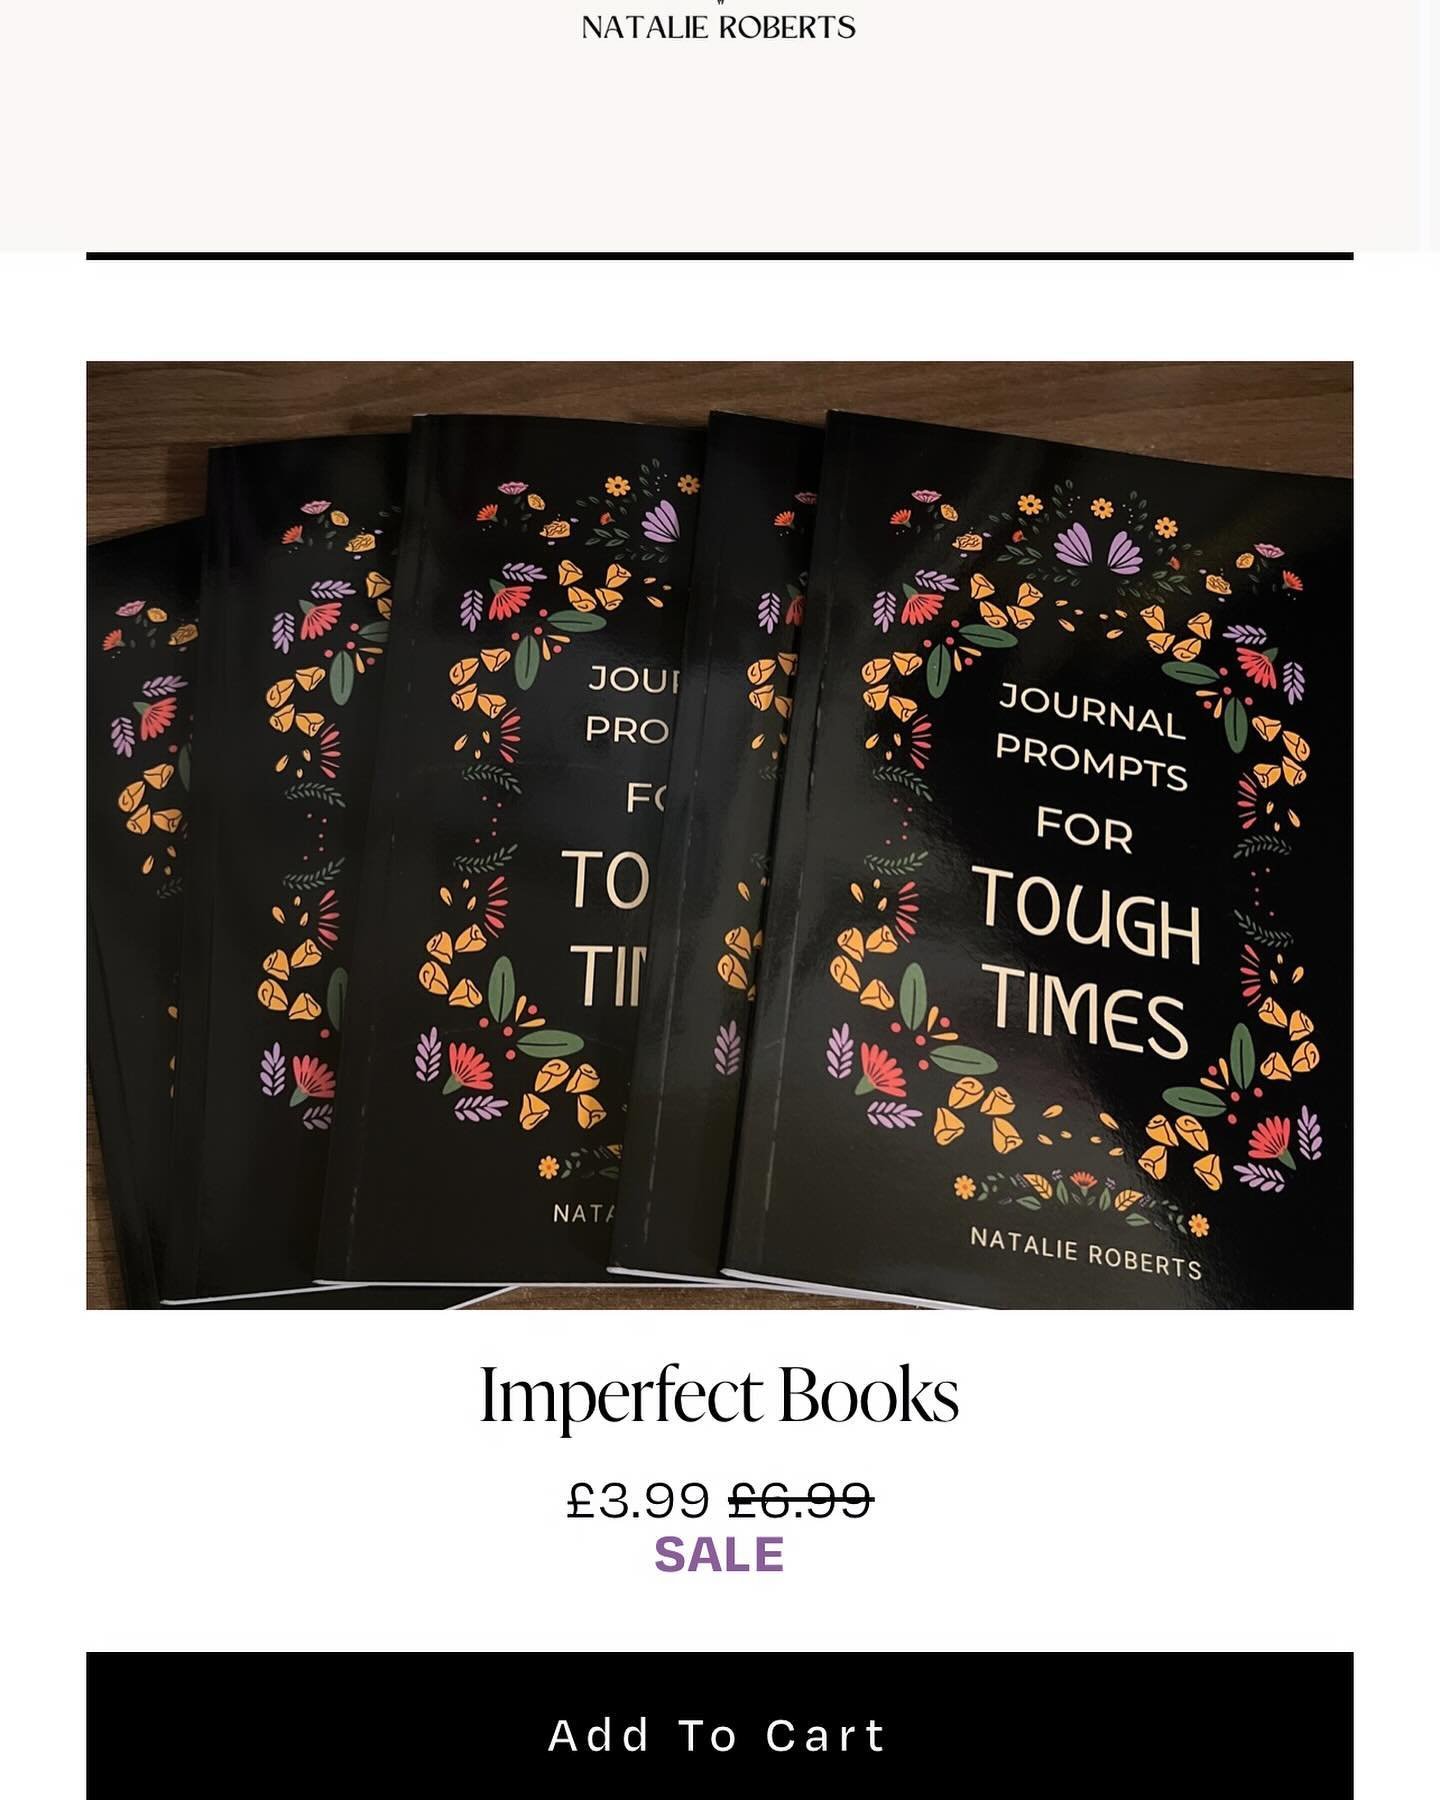 Hey everyone!

So, Amazon are absolutely shocking at packaging author copies of books and as a result, I&rsquo;ve received some damaged books.

I&rsquo;ve popped them on my website at a heavily discounted price, so if you love a bargain, take a look.